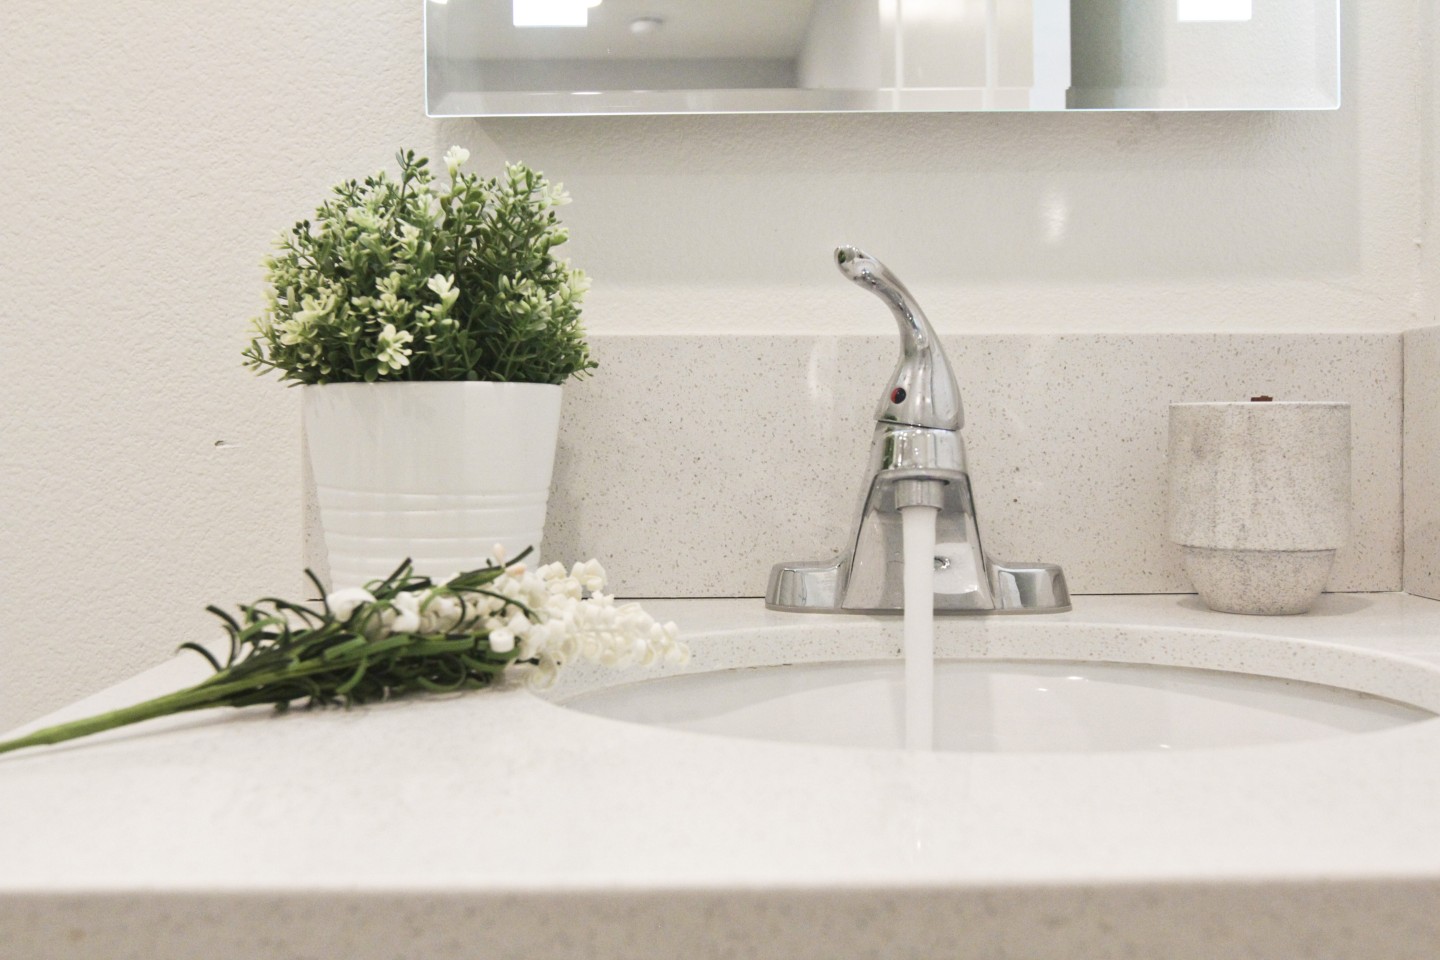 White sink with running water, green plant next to sink 